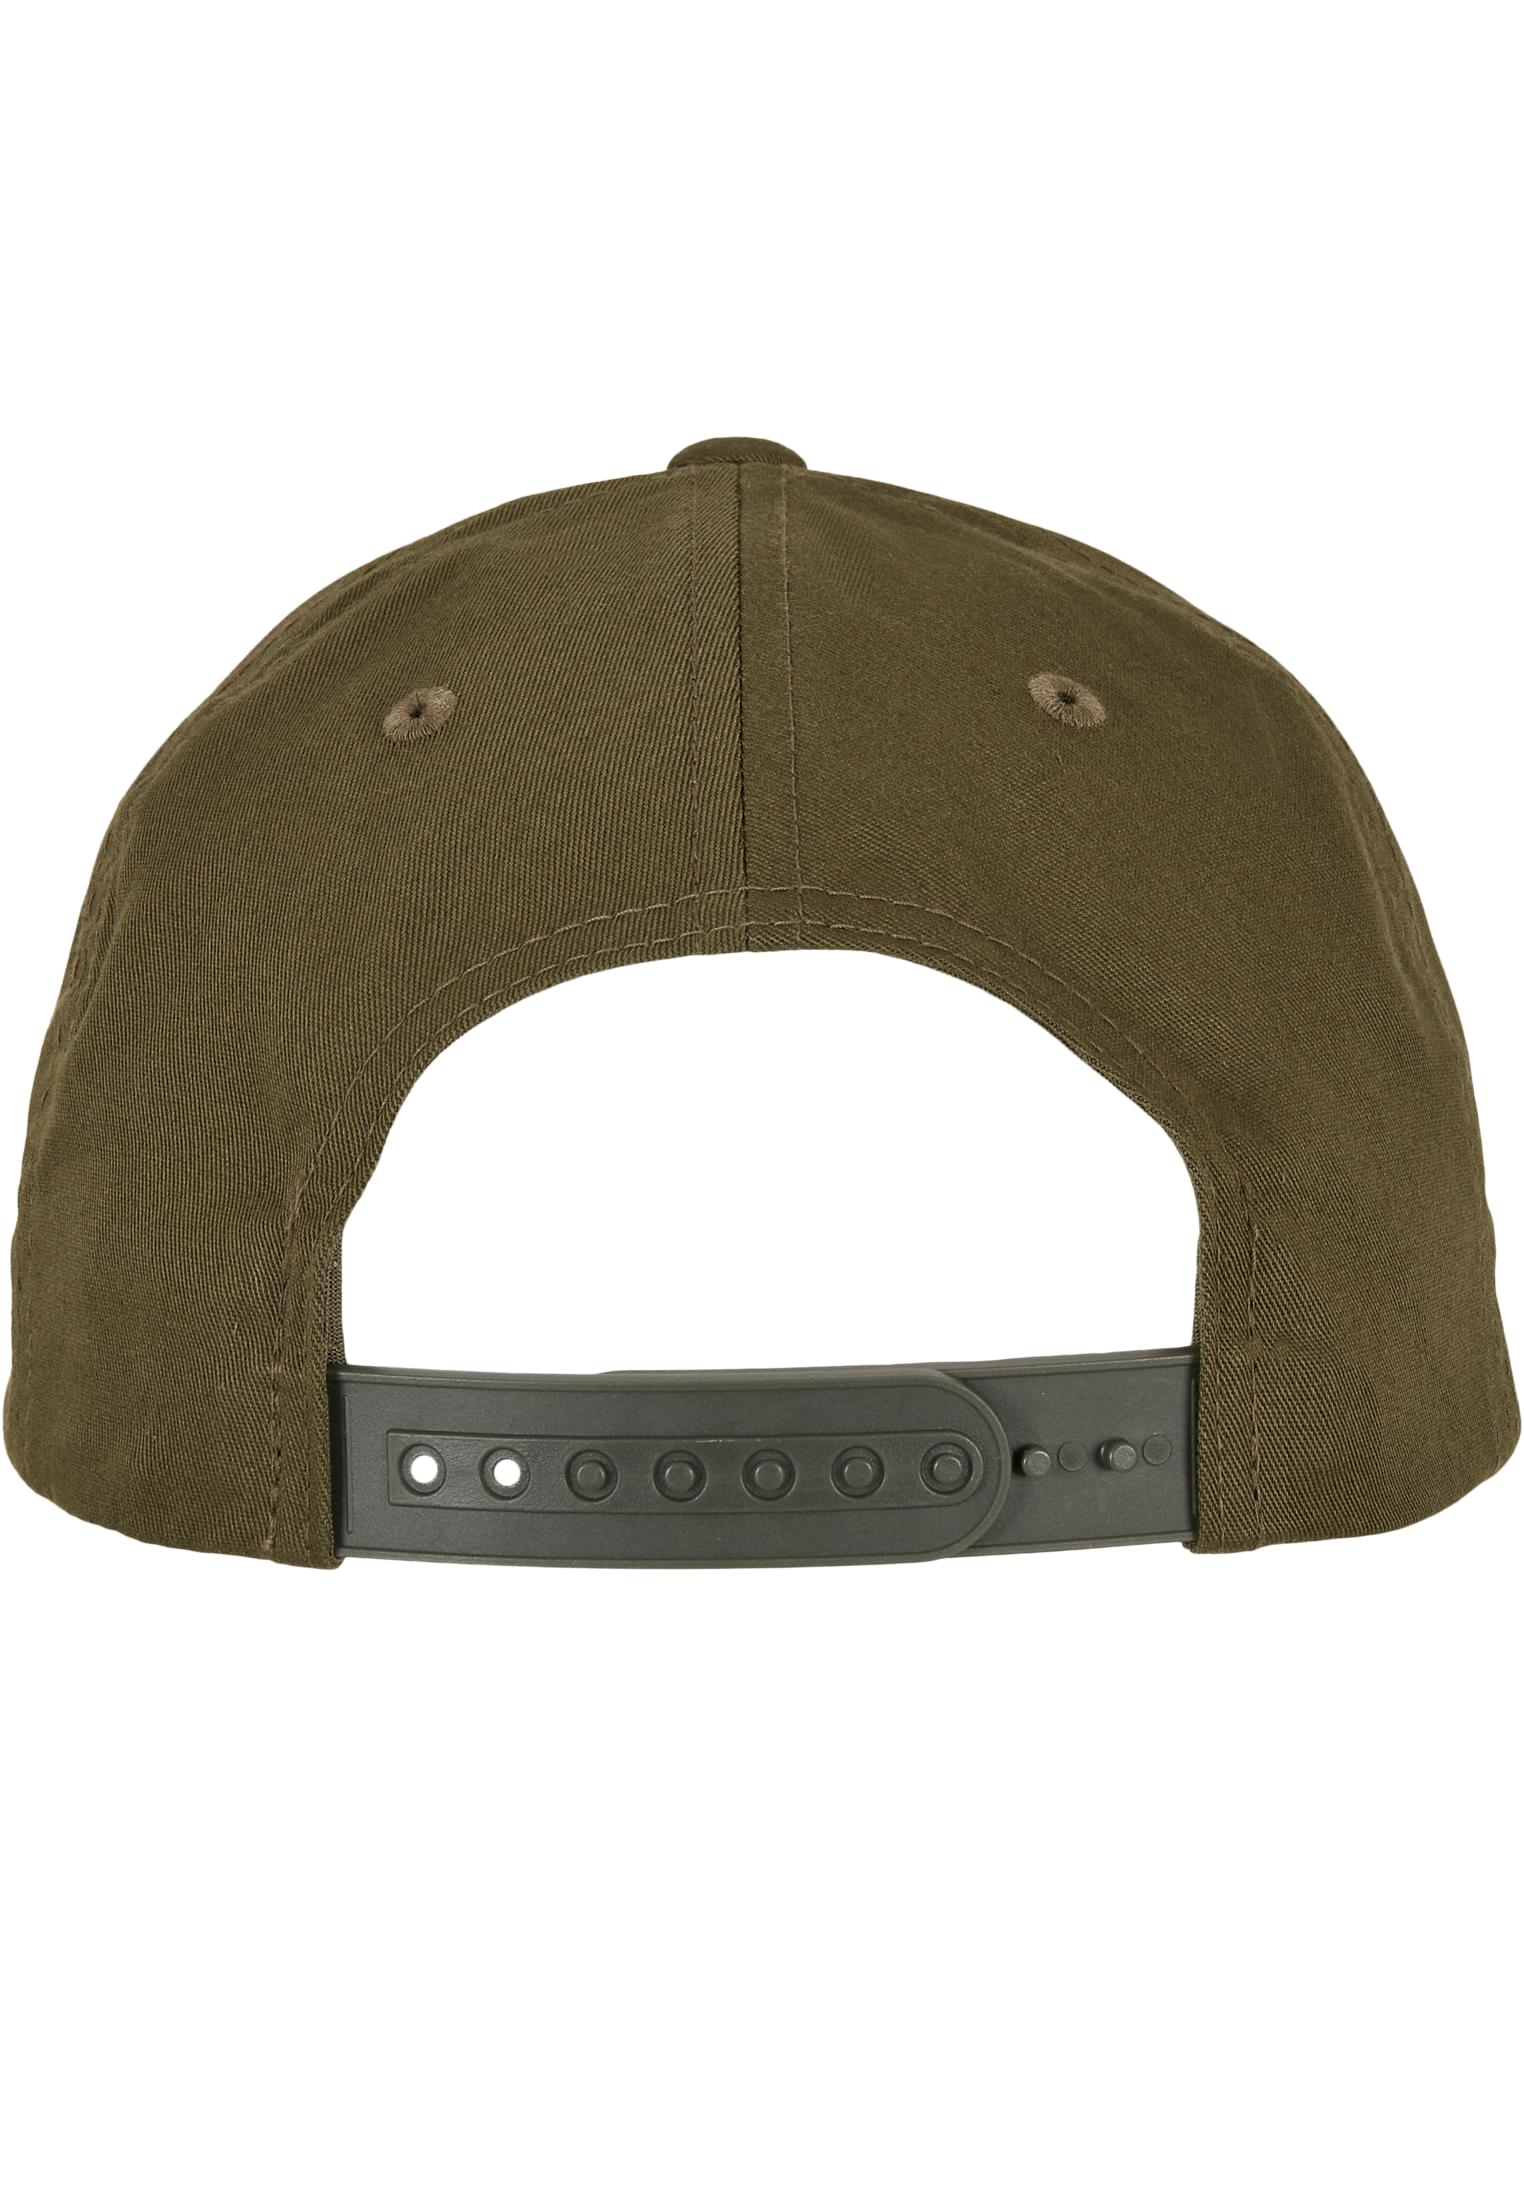 Snapback Curved Classic Snapback in Farbe buck